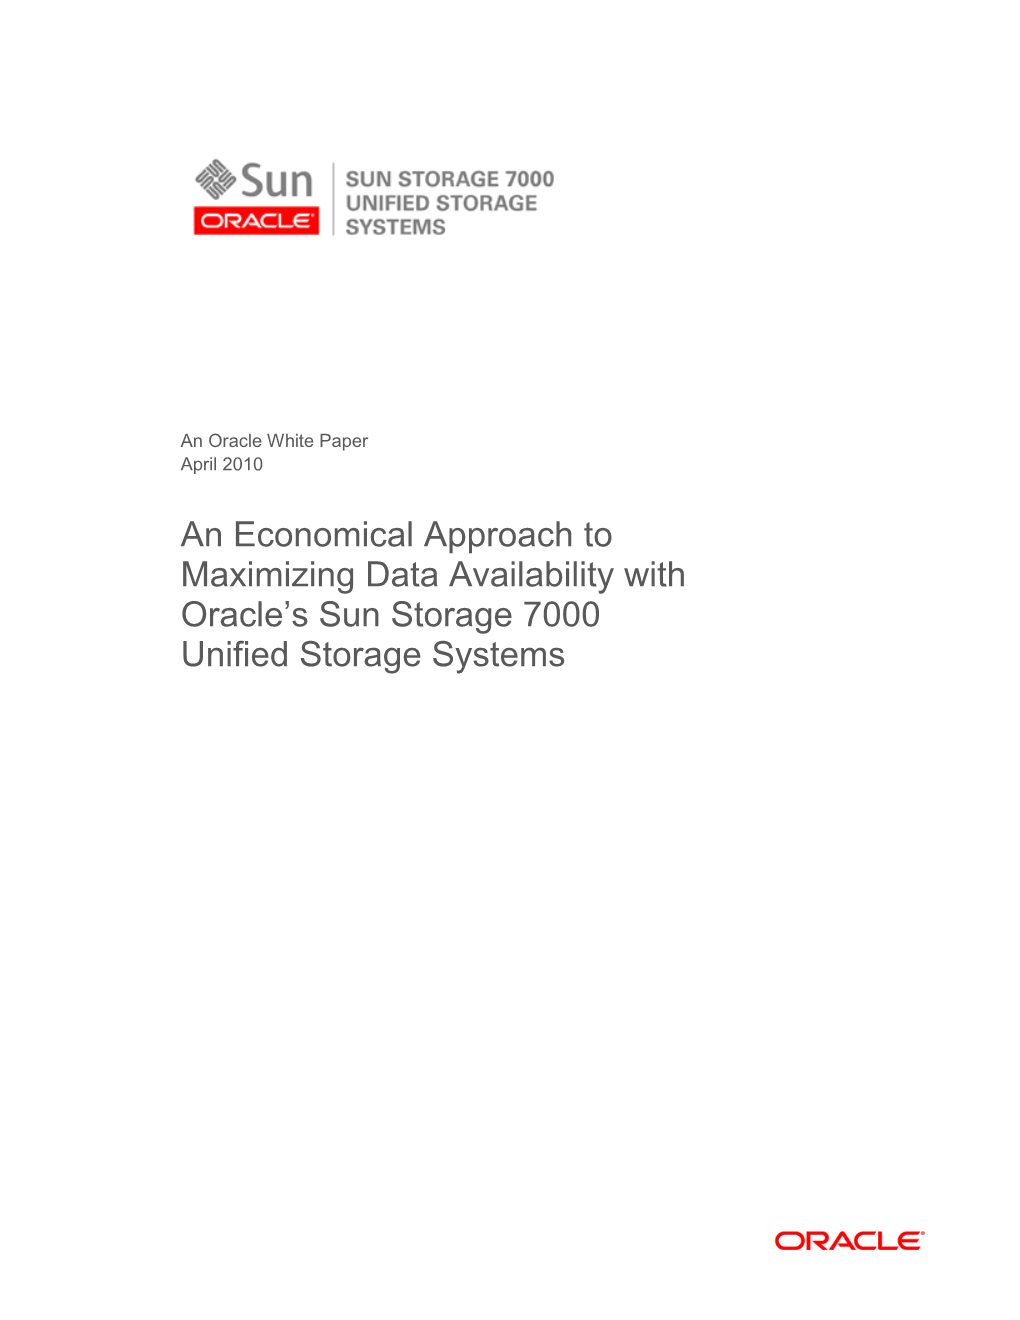 An Economical Approach to Maximizing Data Availability with Oracle’S Sun Storage 7000 Unified Storage Systems